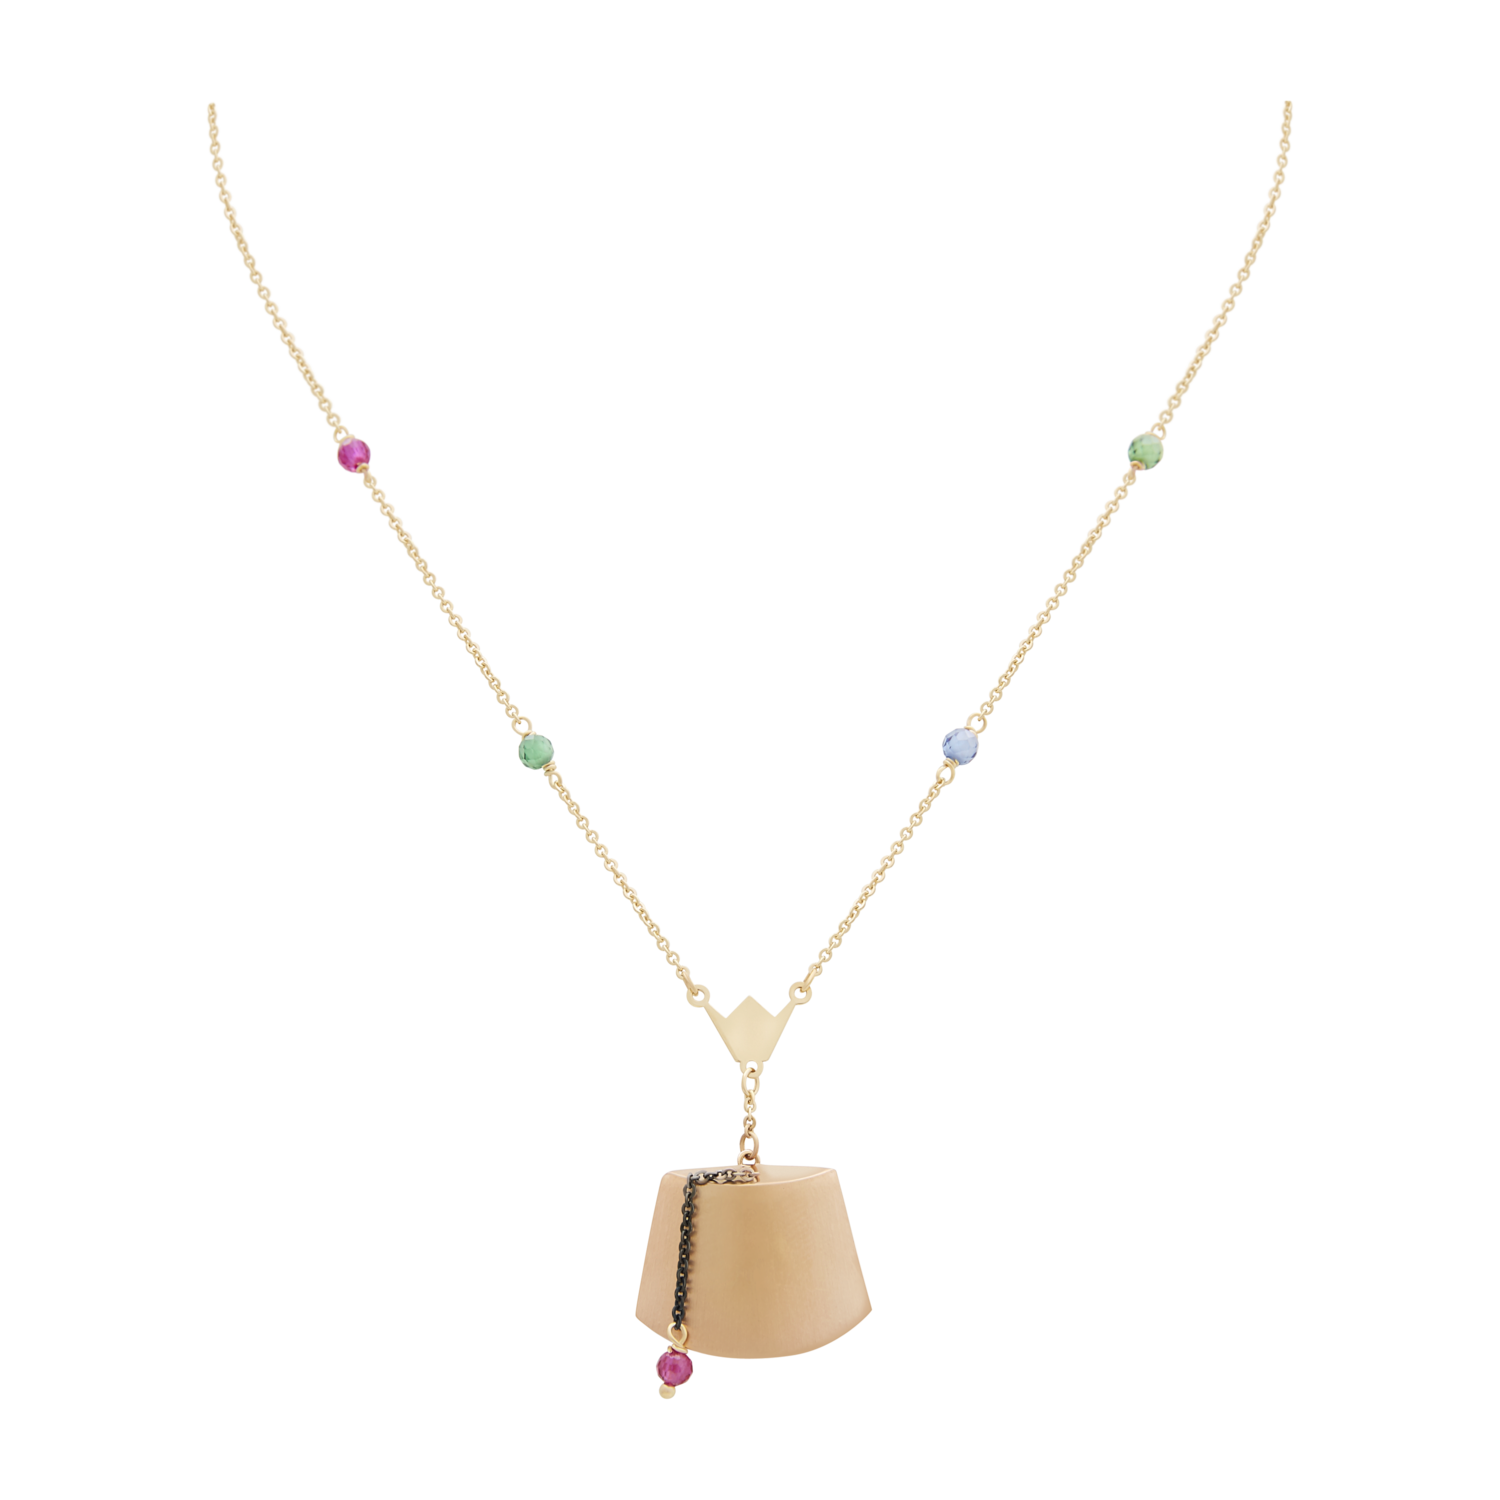 Tarboush Gold Necklace with Colored Stones